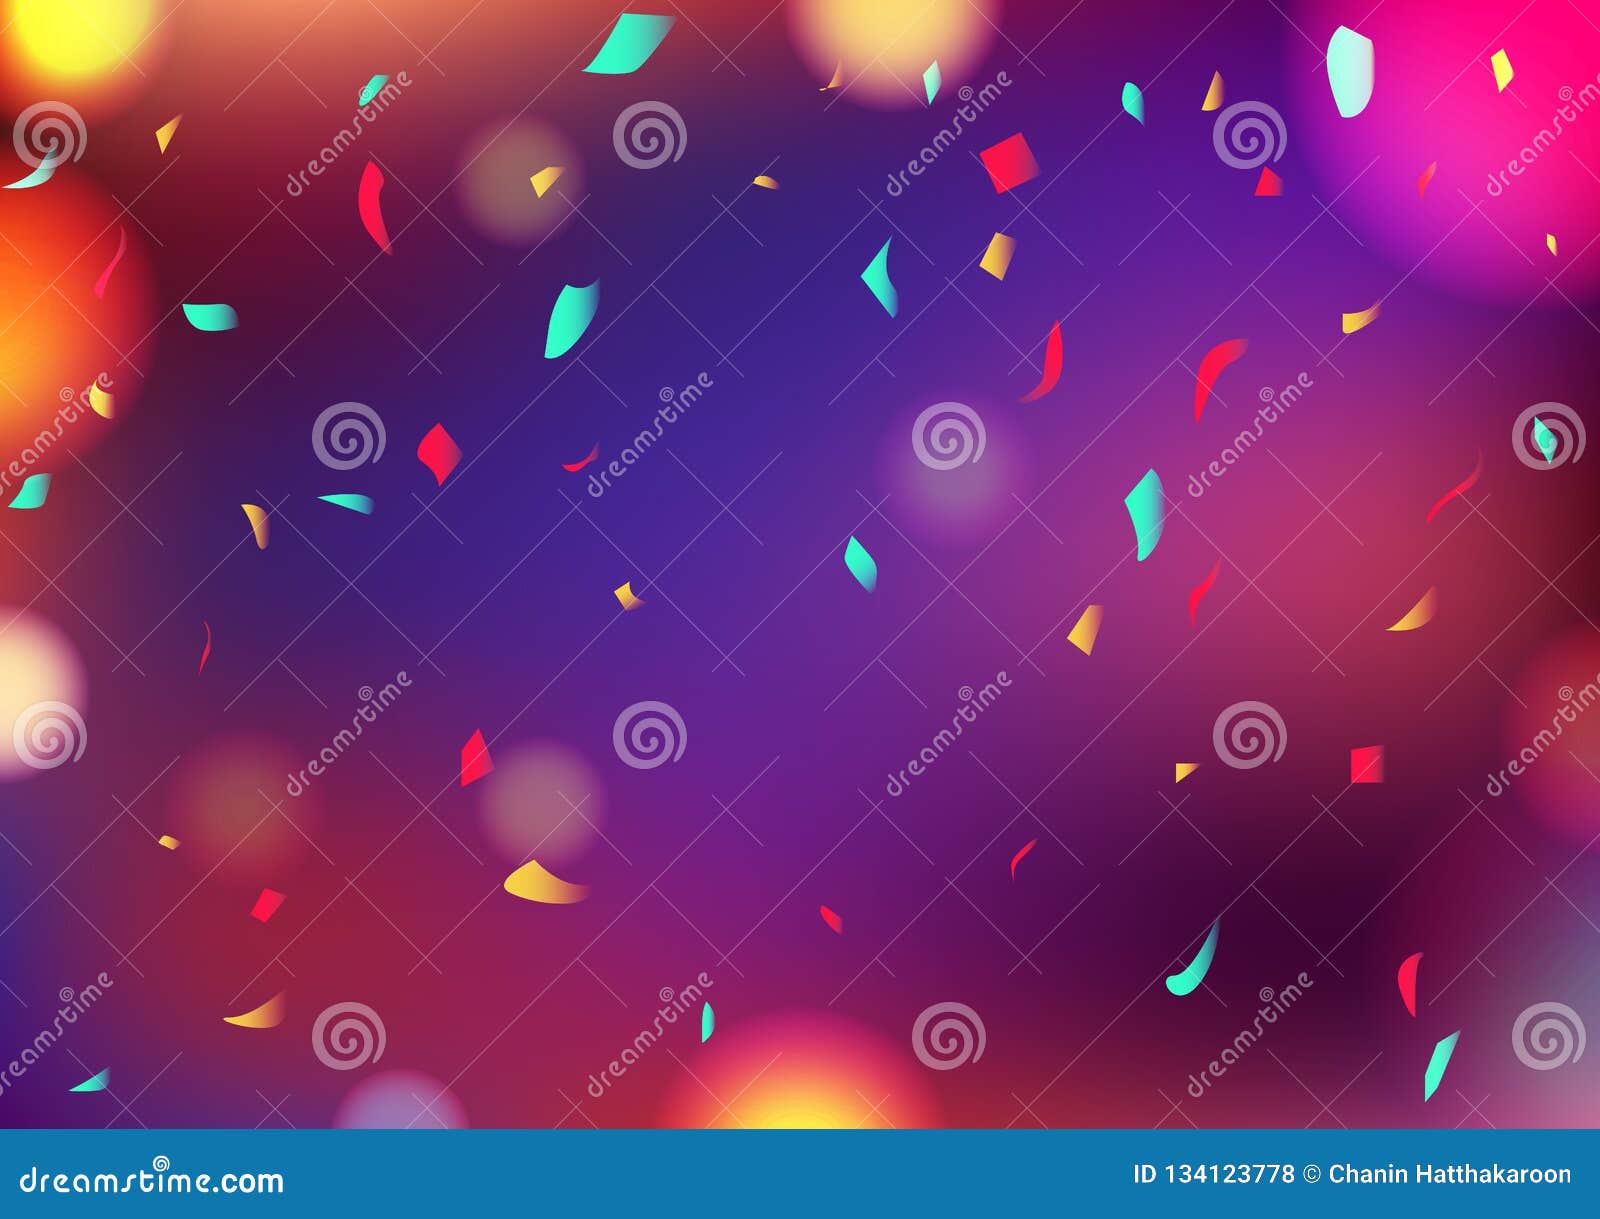 celebrate party blurry colorful bokeh abstract background decoration confetti falling, greeting card festival event concept 